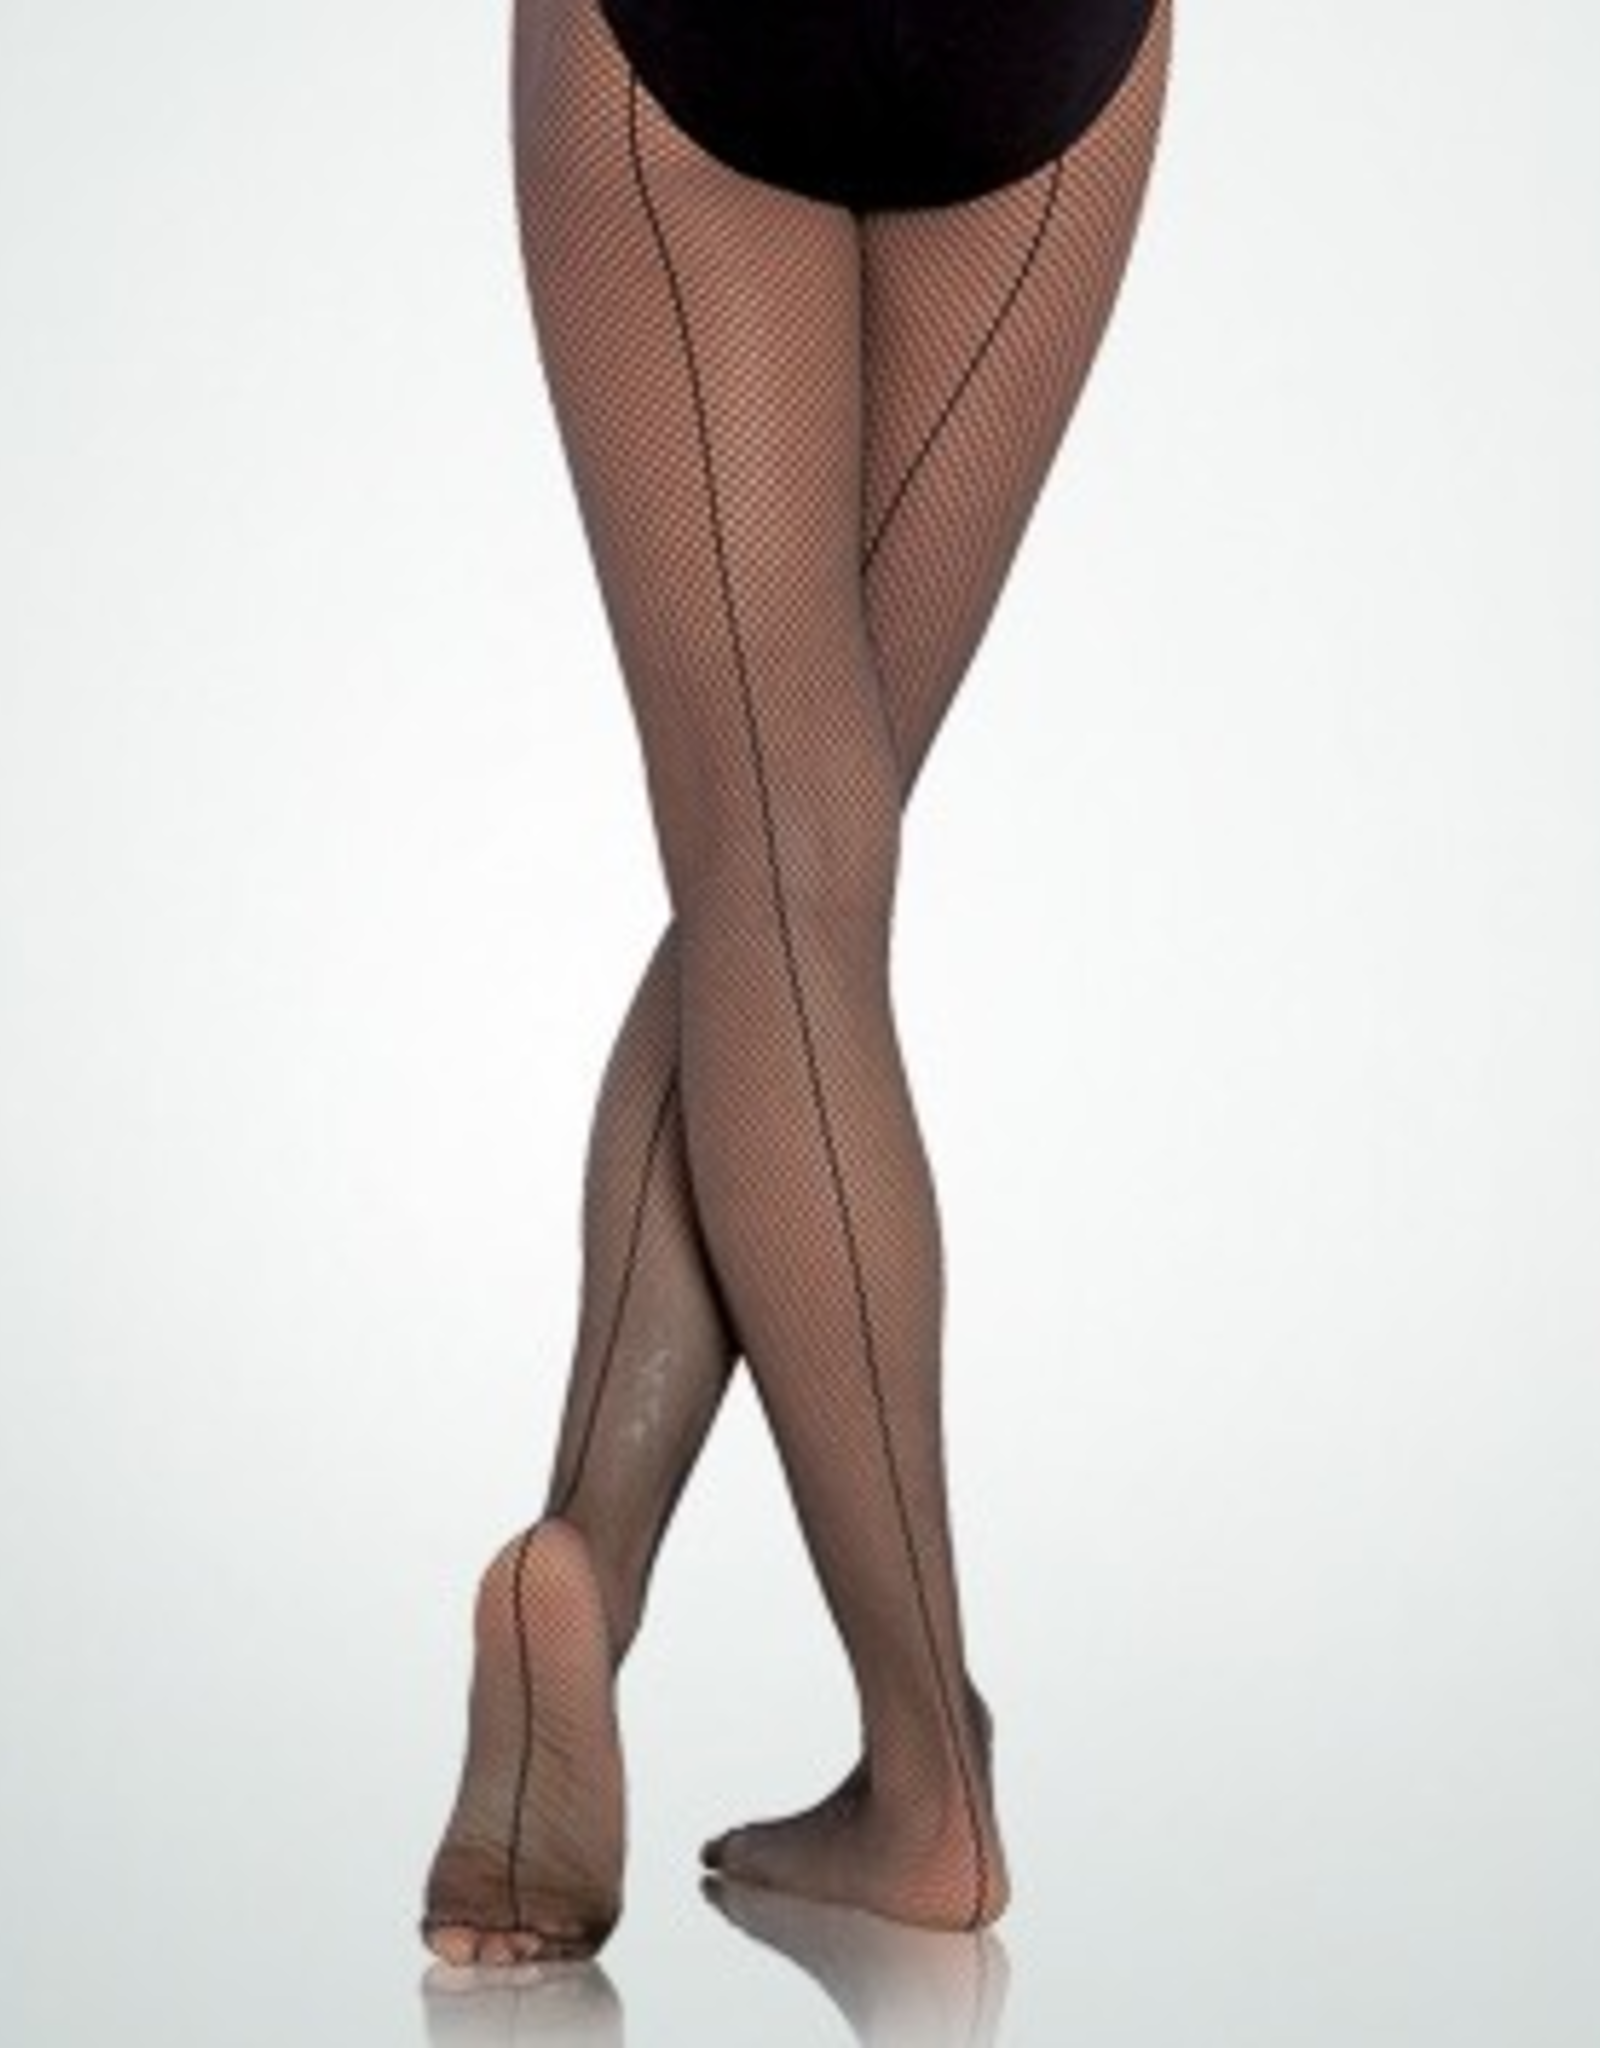 Bodywrappers C62 Fishnet Seamed Total Stretch Tights Youth